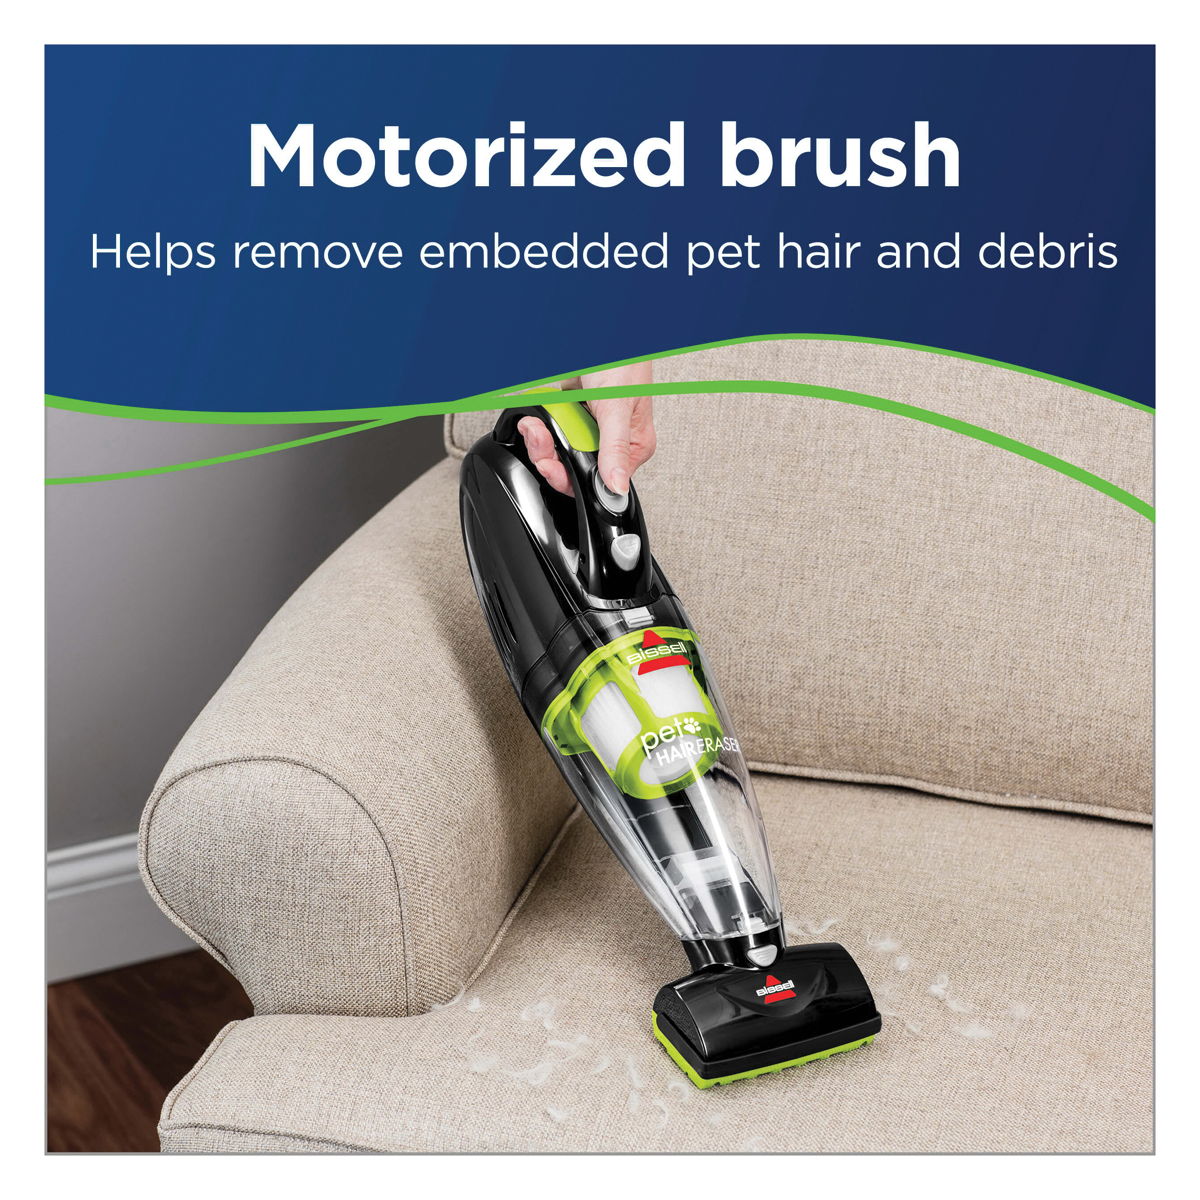 BISSELL Pet Hair Eraser 1782 Cordless Hand Vacuum, 14.4 V Battery, 4-1/2 in W Cleaning Path - 3